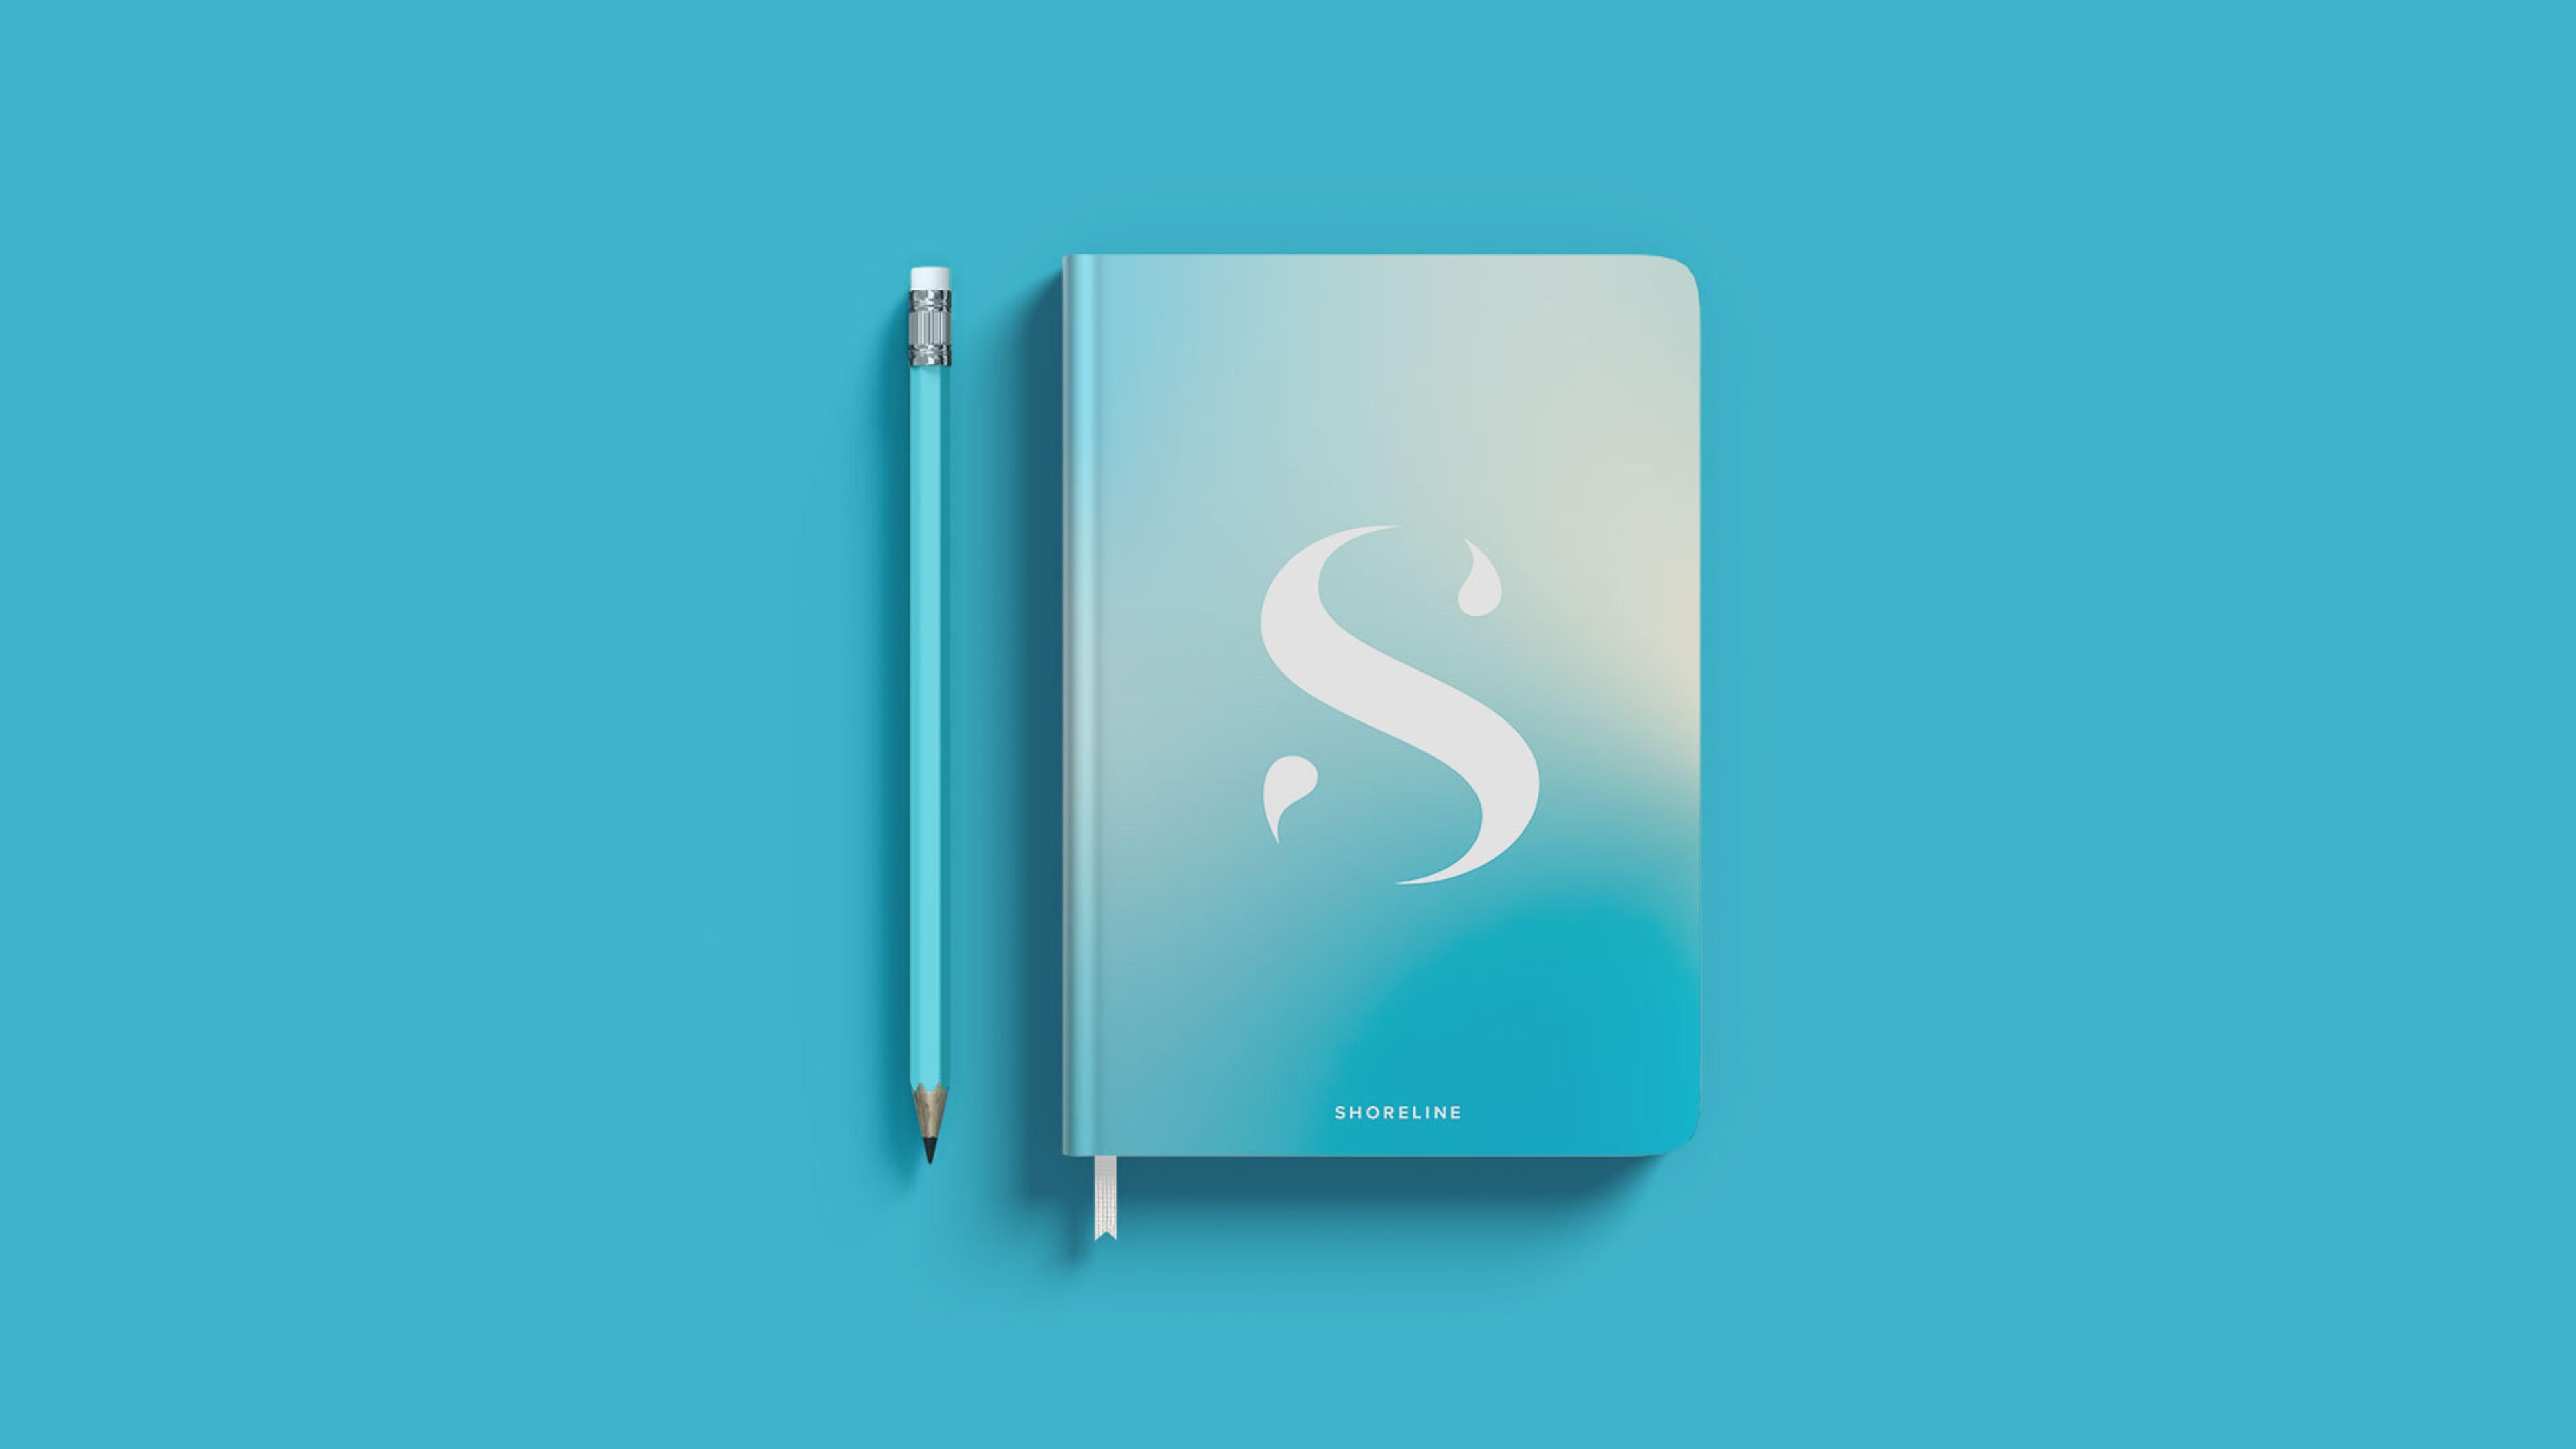 ShoreLine branding on a blue notebook with a blue pencil next to it